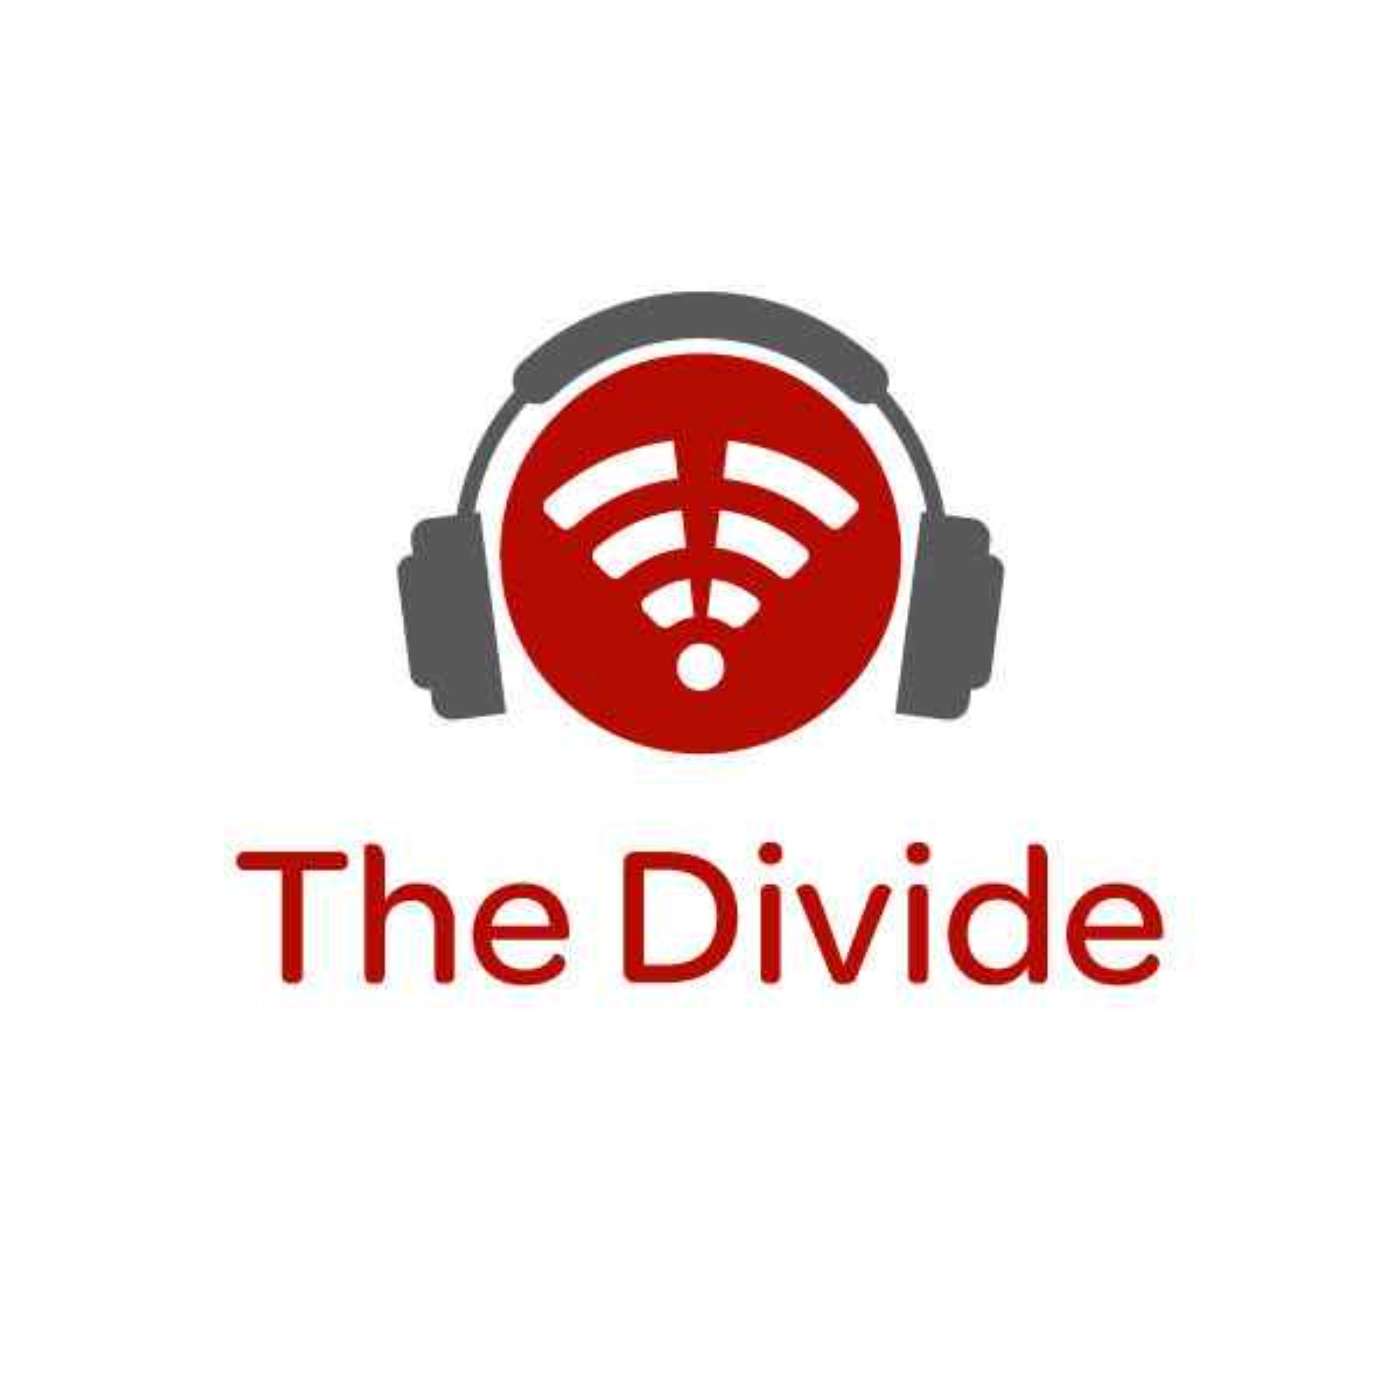 The Divide: Free Press’ Josh Stager on the FCC’s move to restore Title II oversight